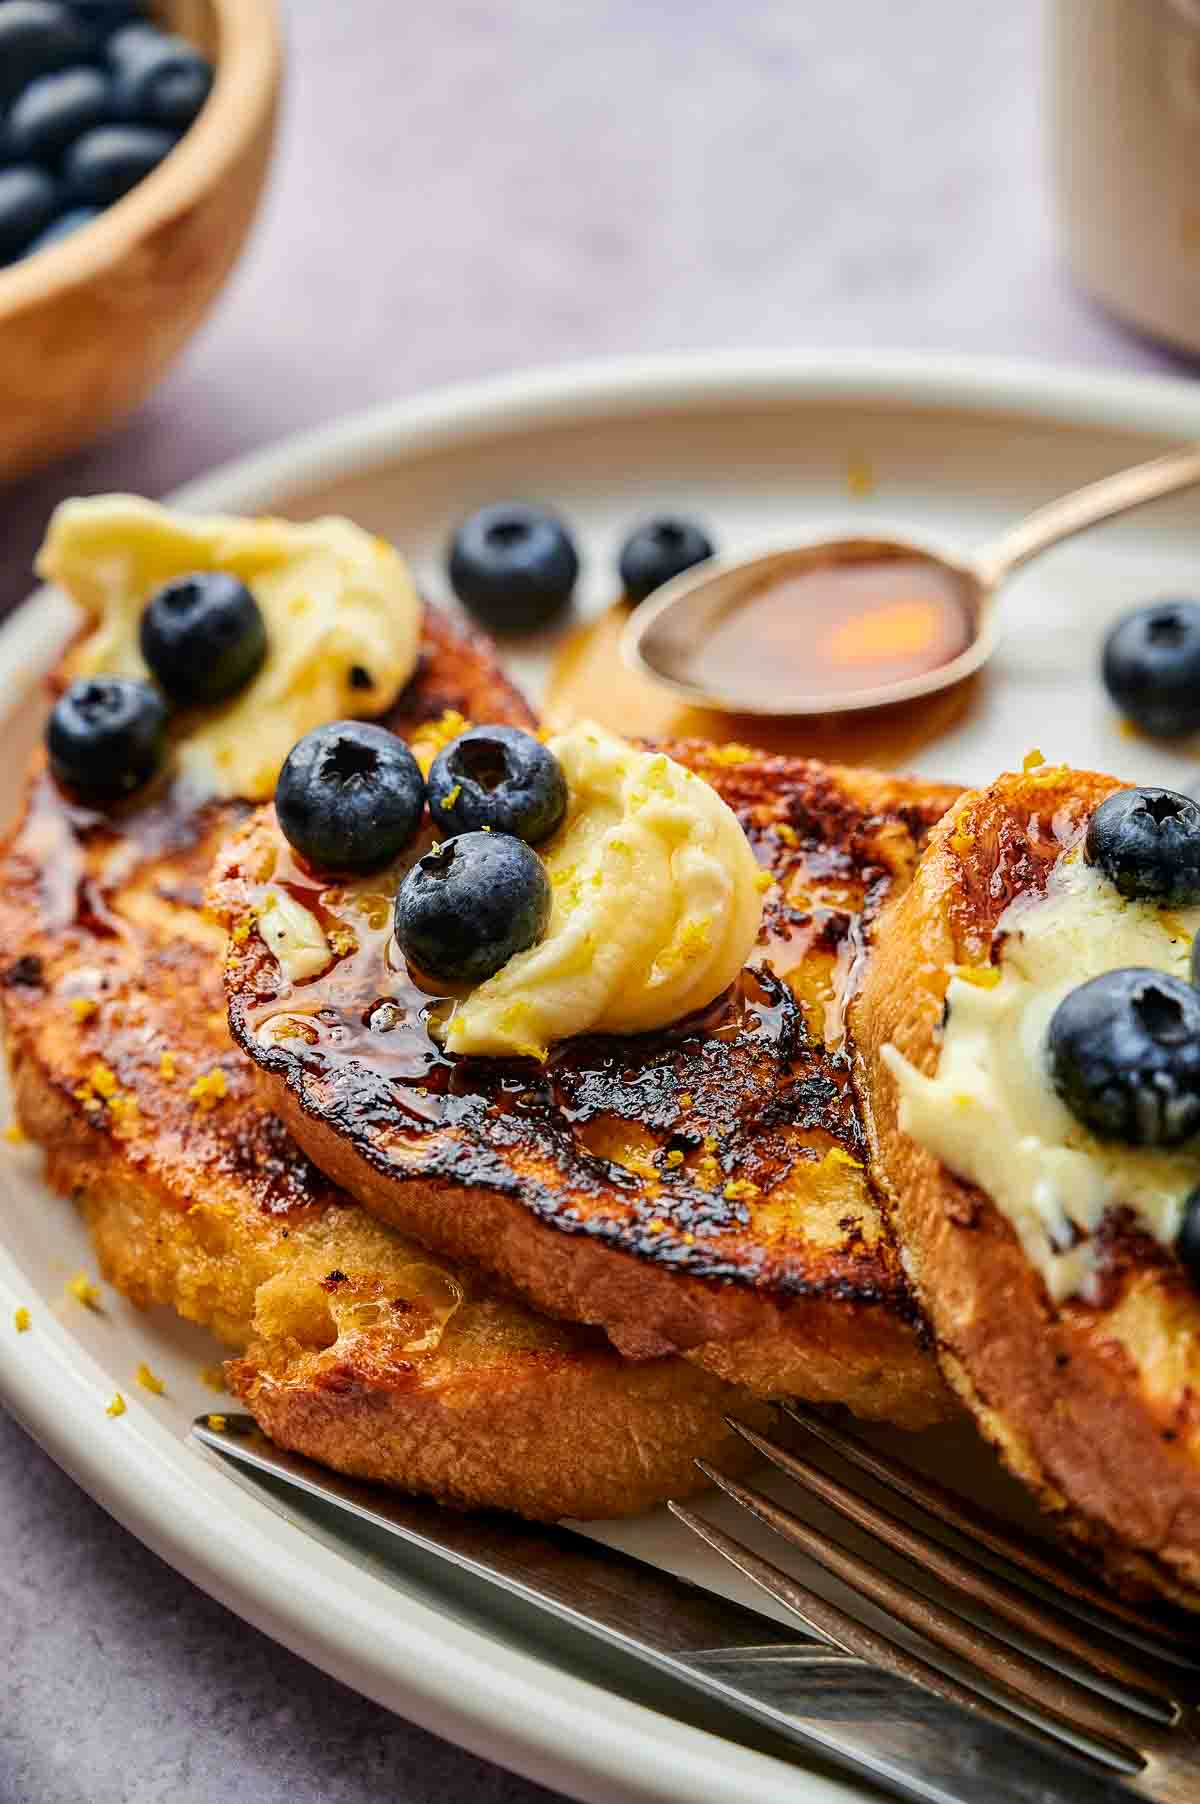 Lemon and blueberry mascarpone French toast on a white plate. Some additional blueberries are visible in the background.